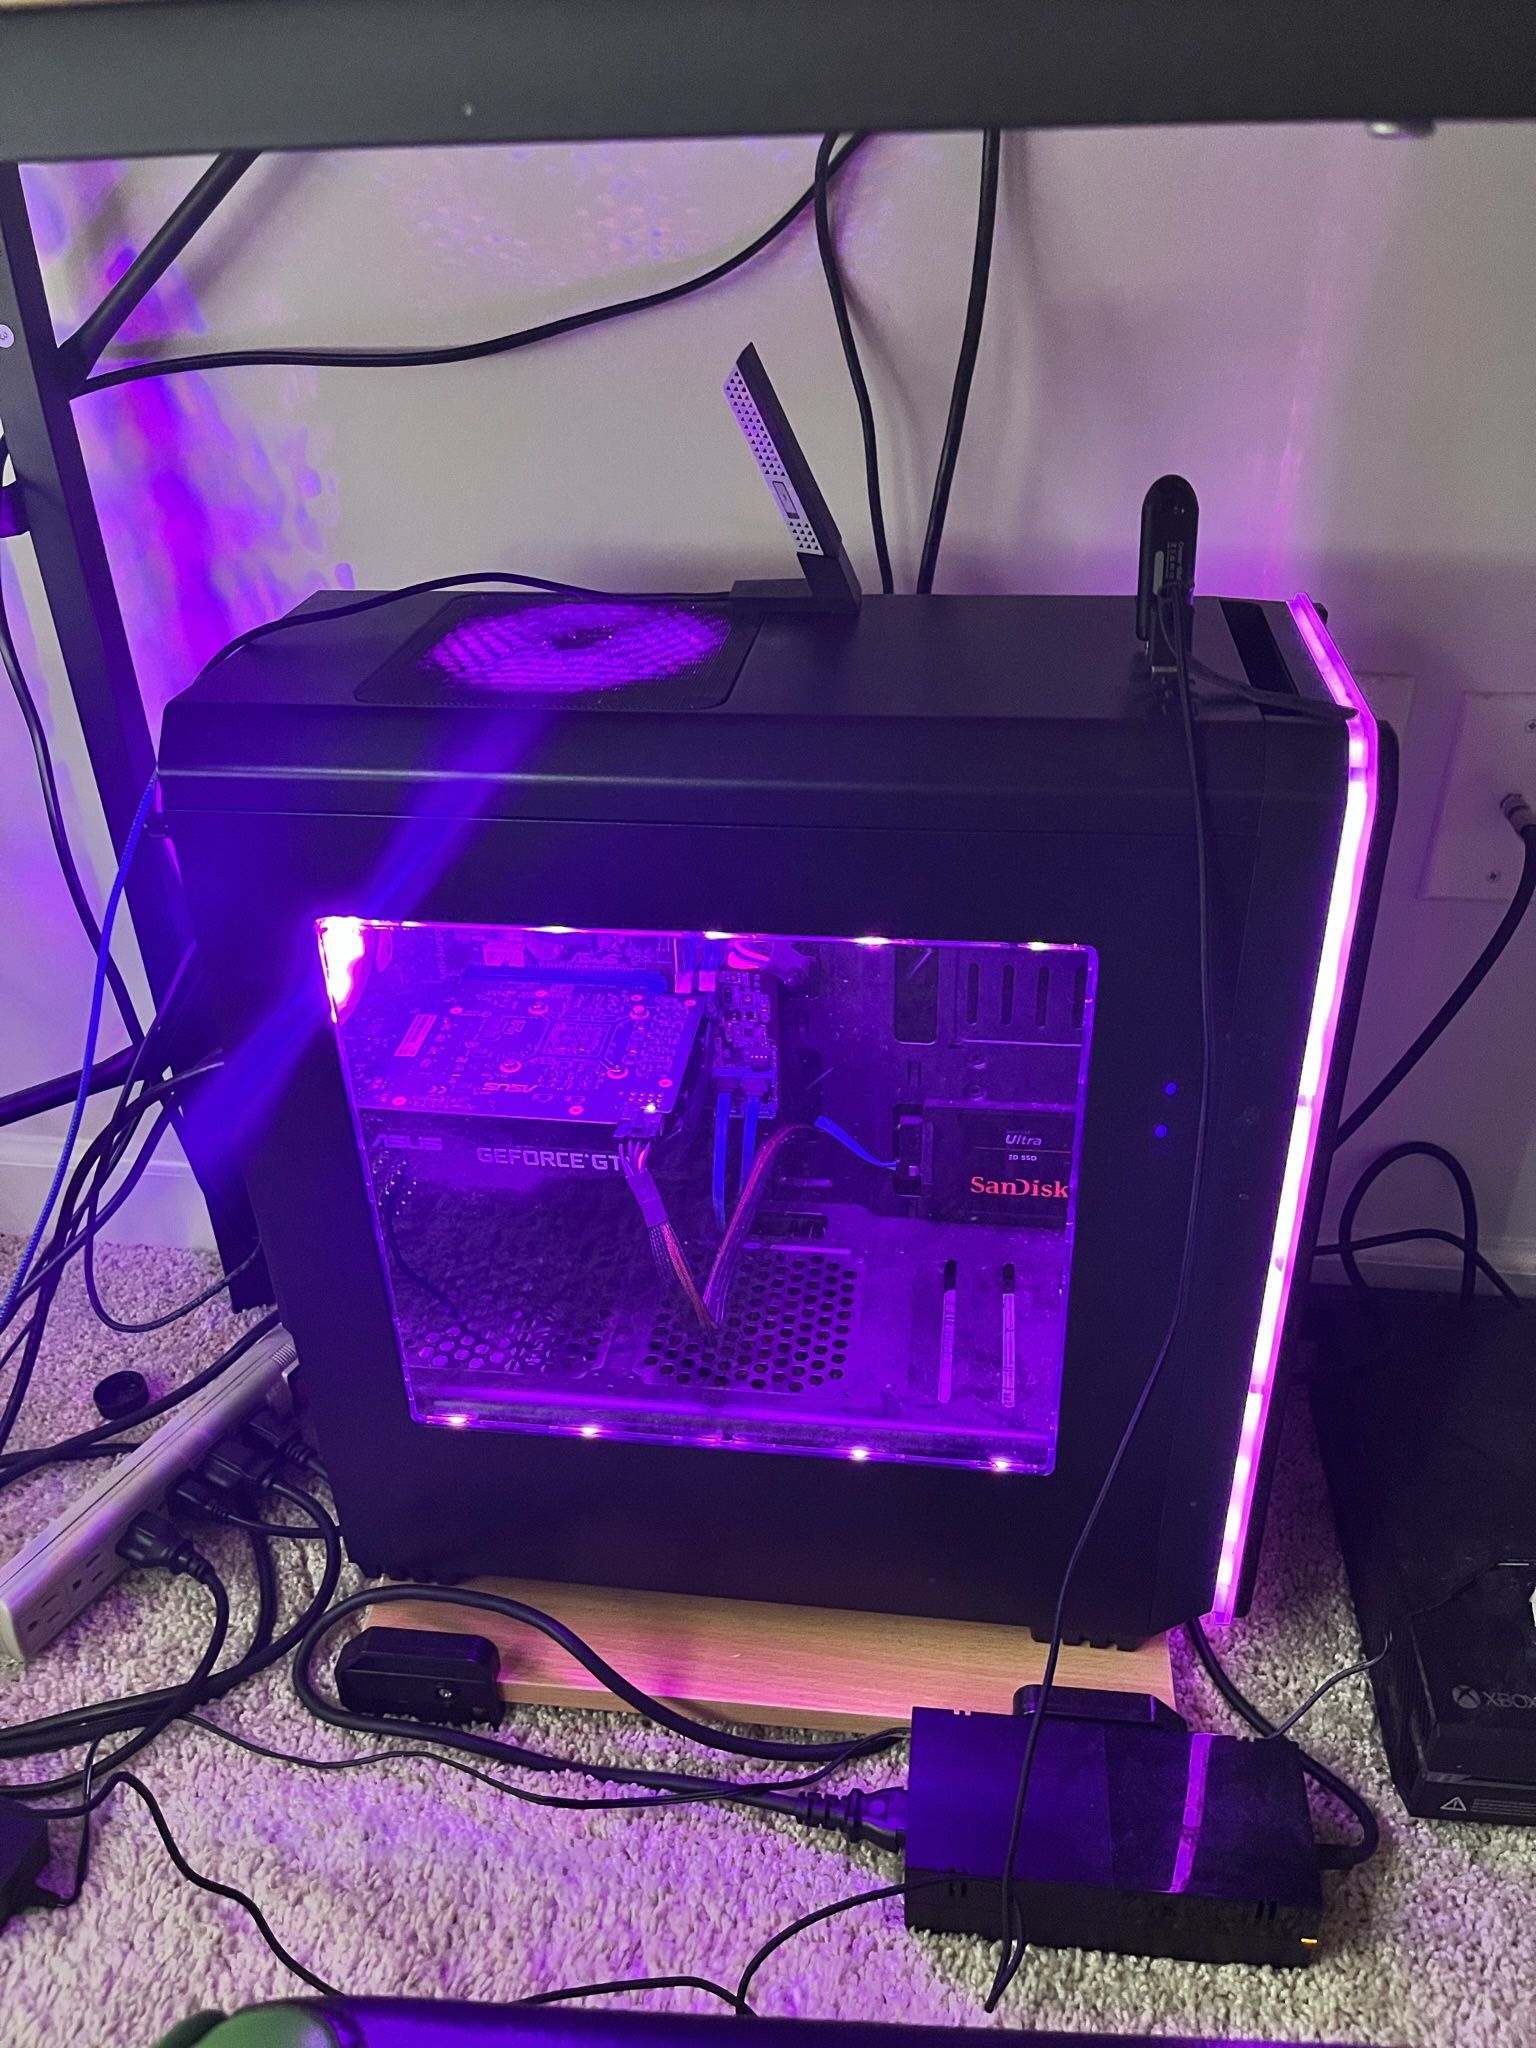 Multi LED case + motherboard + cpu (parts)